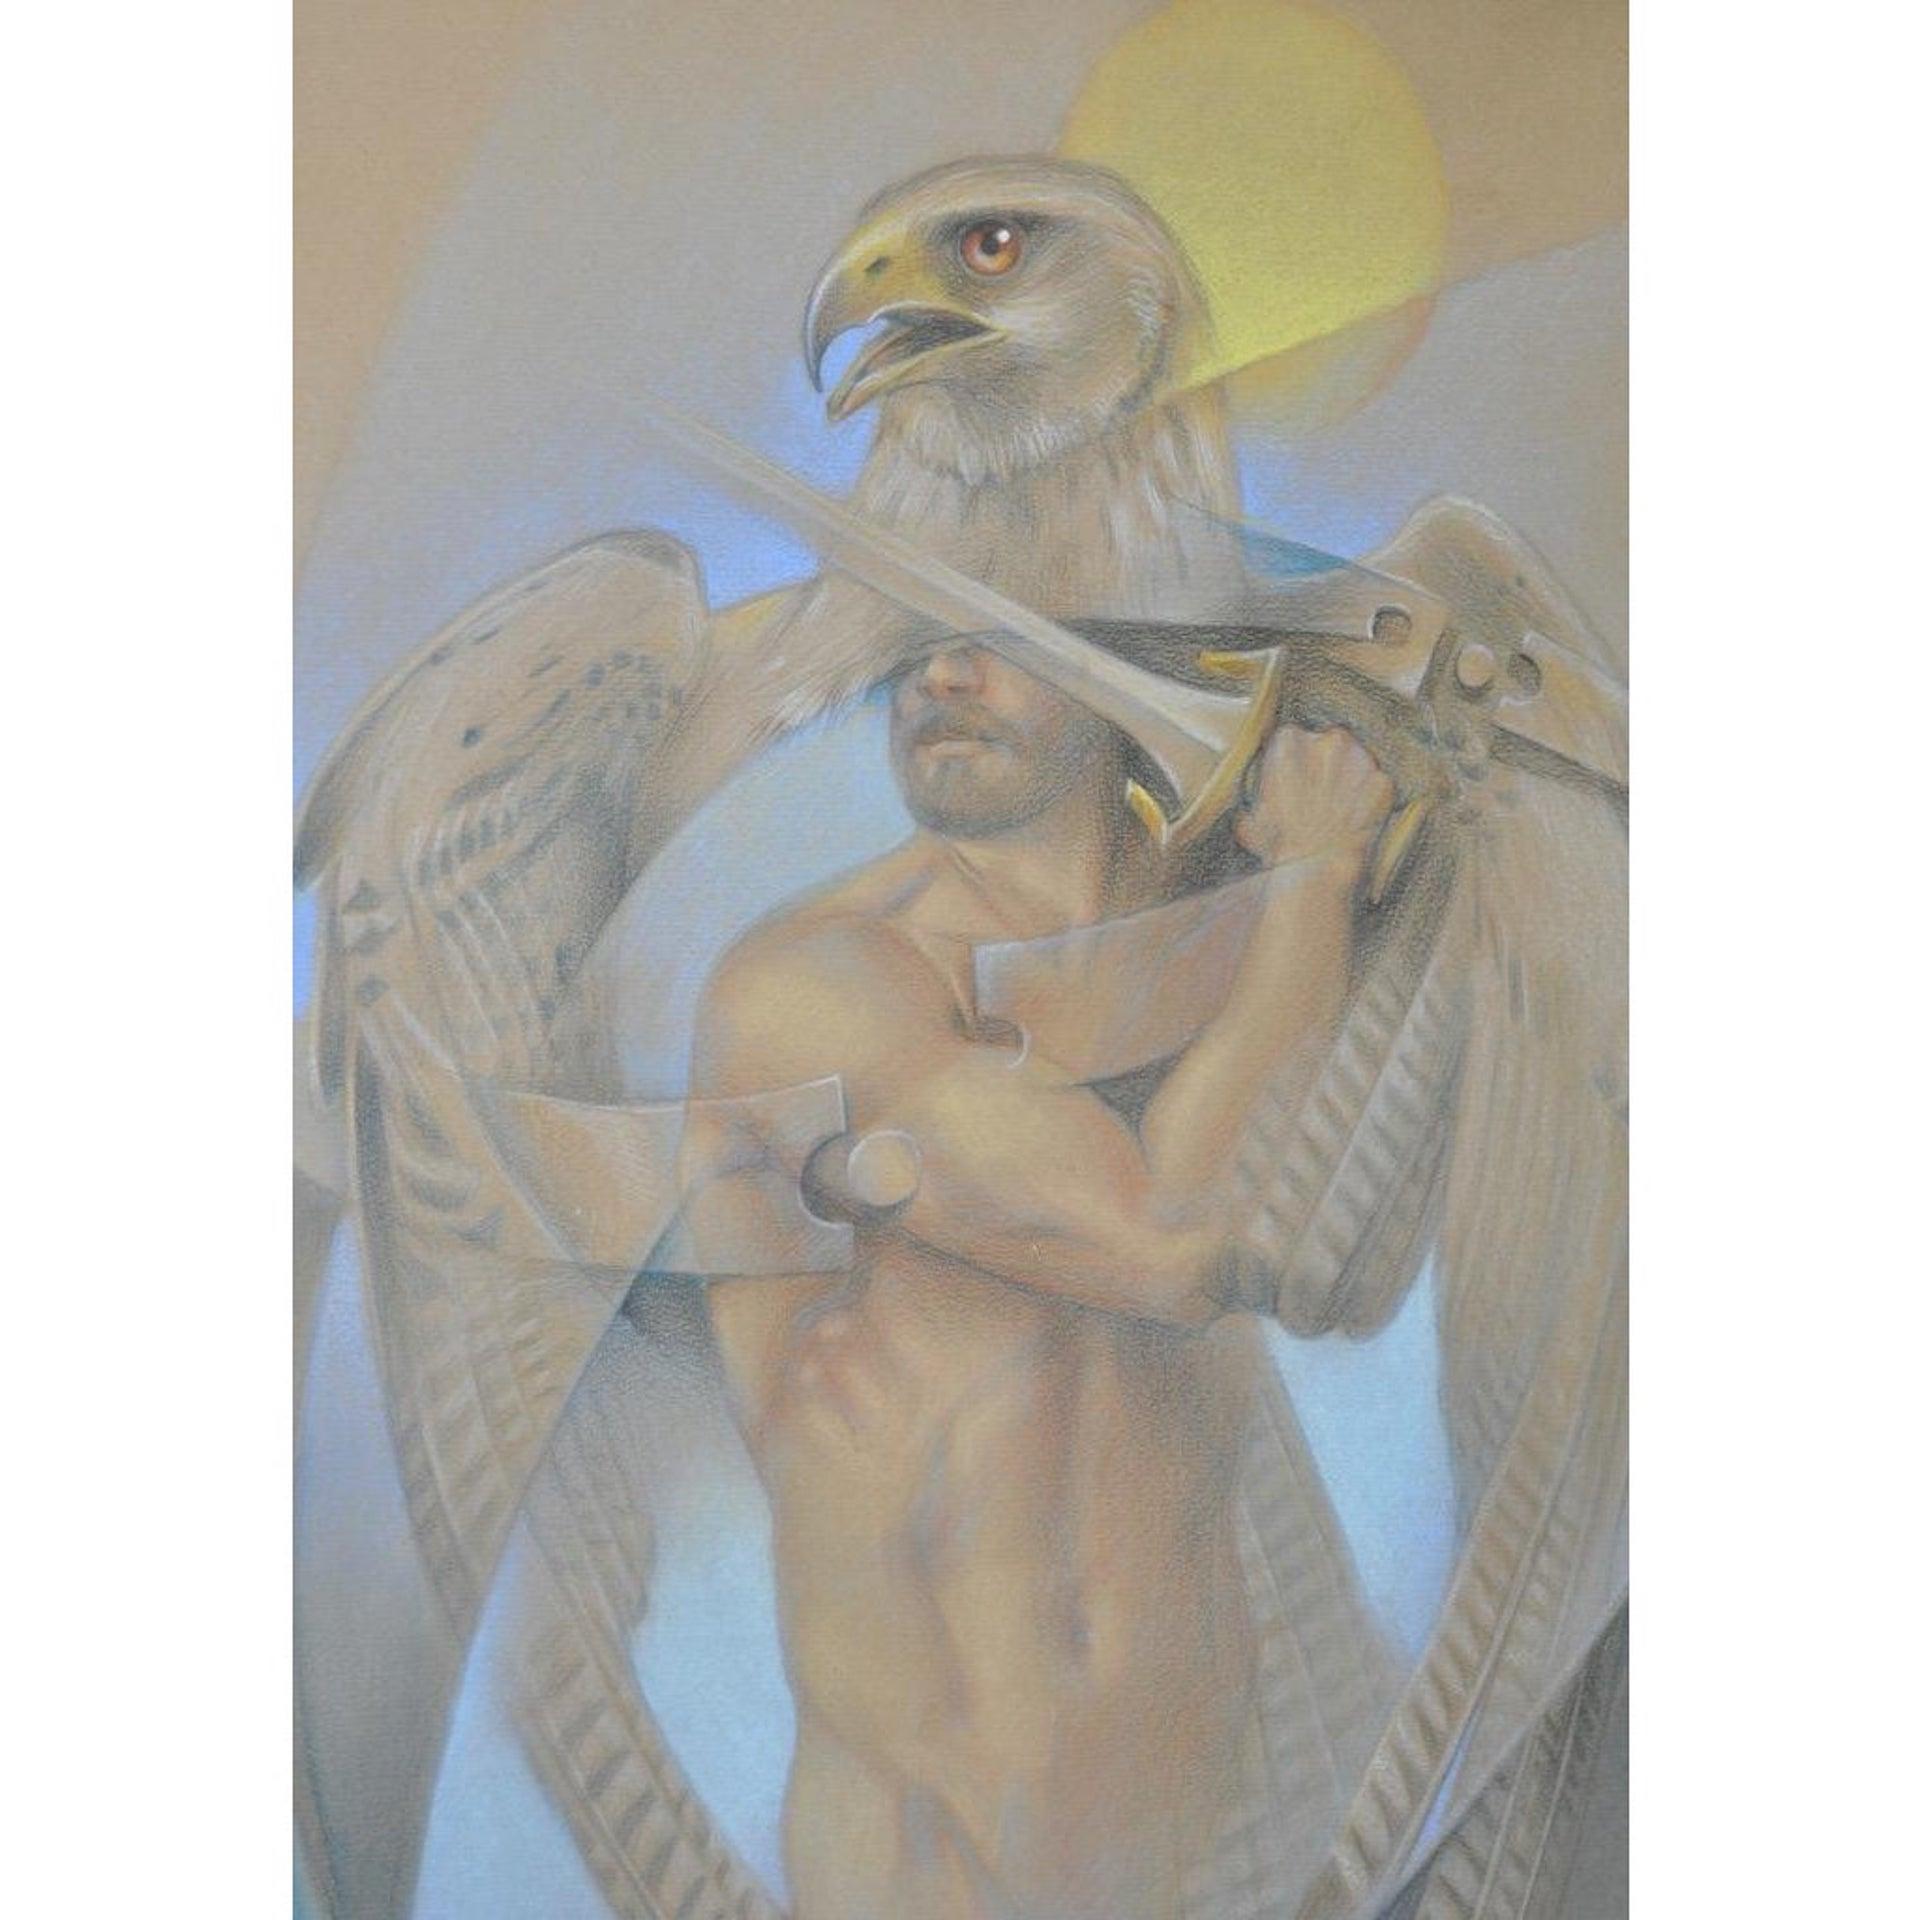 Vintage Fantasy Dreamscape in Color Pencil by Vilela Valentin c.1986

This is a remarkable original illustration done in color pencil by a very talented artist.

A handsome man in a prism of light as his soul, in the form of an eagle, rises to